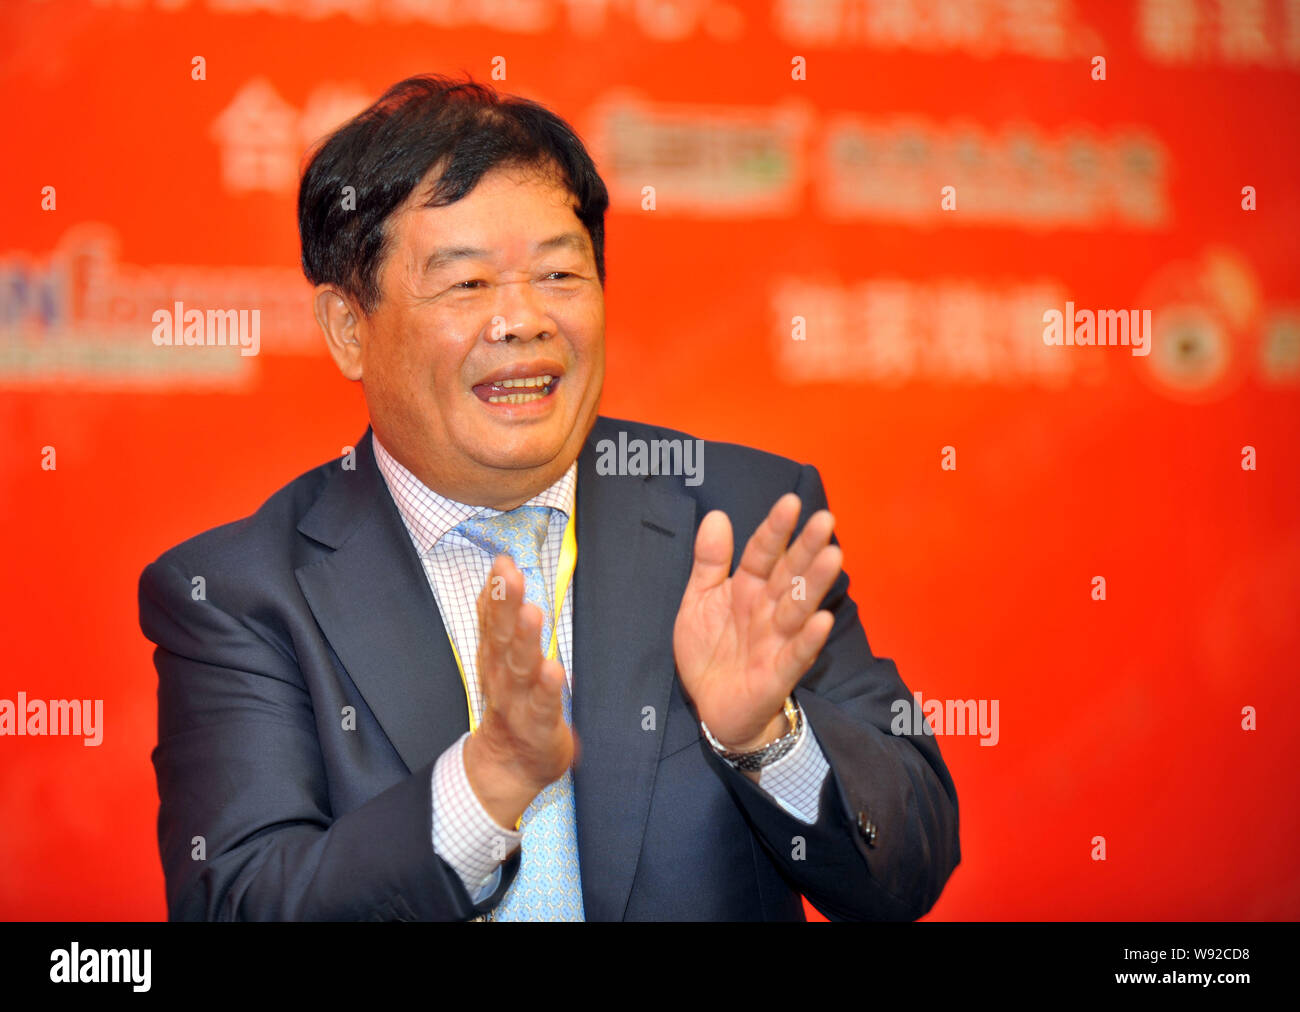 --FILE--Cho Tak Wong (Cao Dewang), Chairman of Fuyao Group and Chairman of Fuyao Glass Industry Group Co., Ltd., applauds during a conference in Xiame Stock Photo